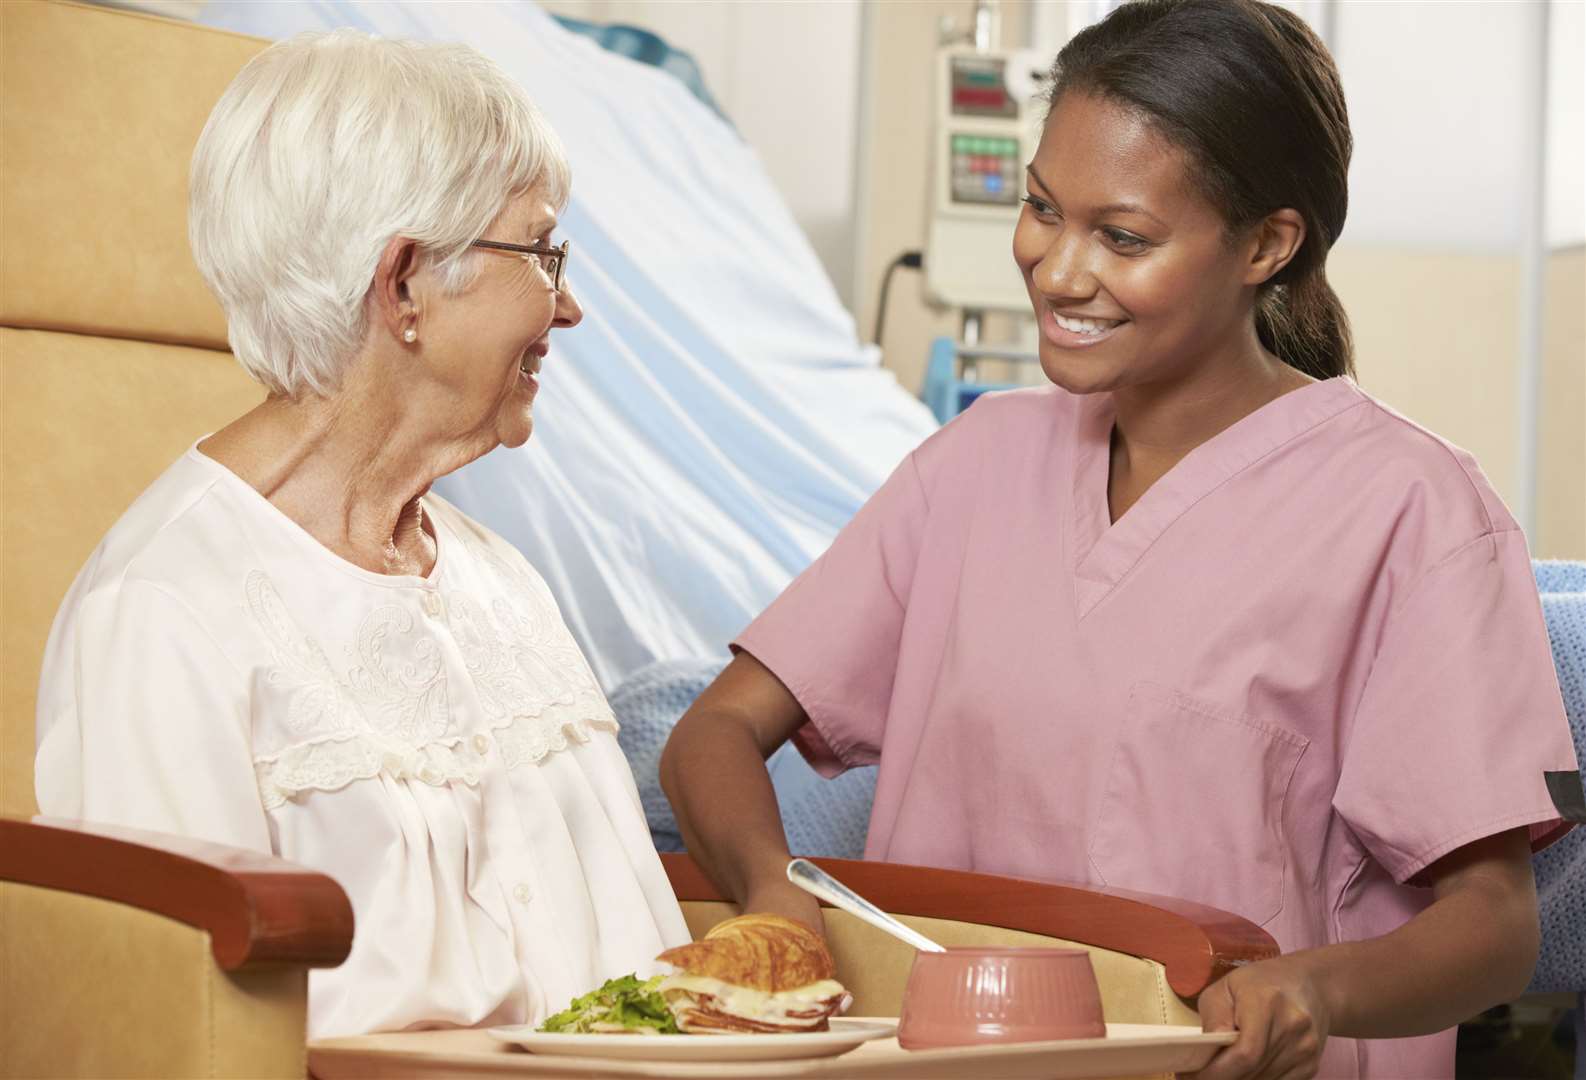 A nurse serving a meal to a patient. Photo: Think Stock